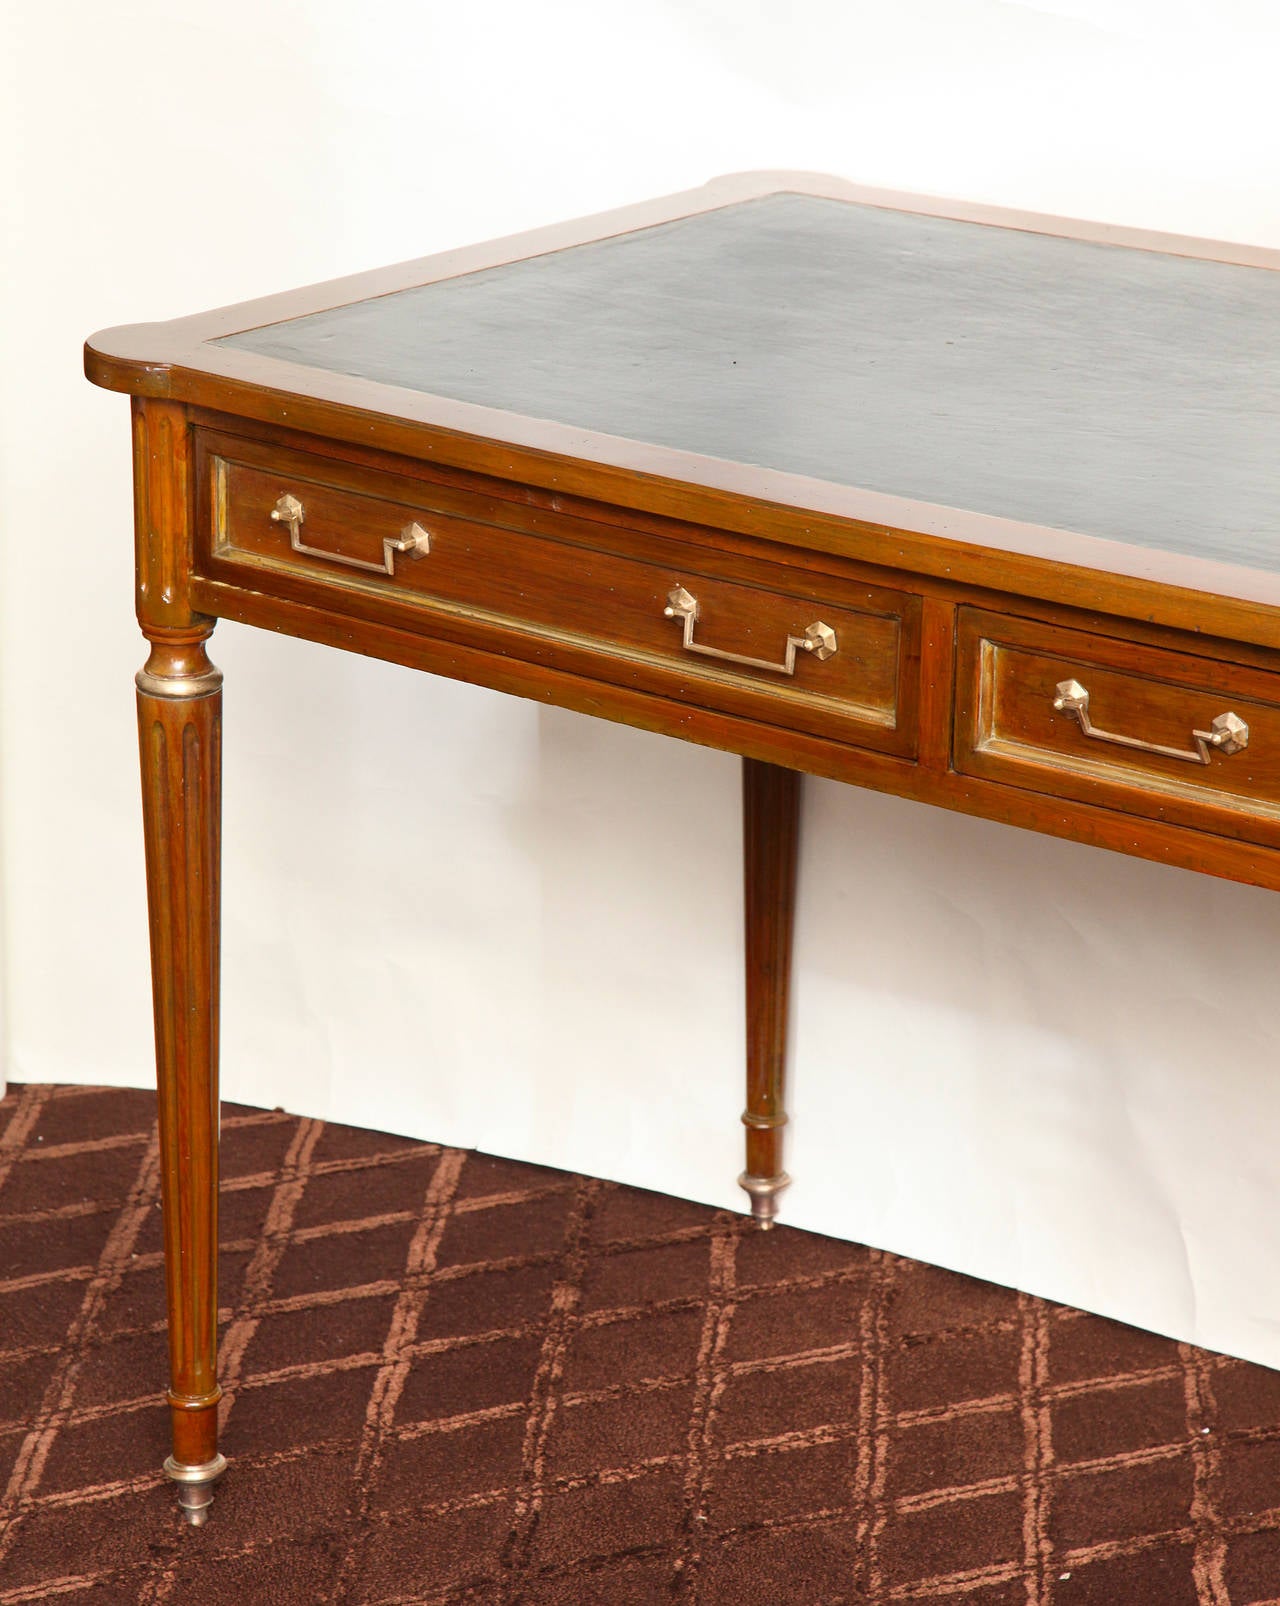 A French Louis XVI style fruitwood writing table finished on four sides and having two drawers in the apron with brass pulls. The top with rounded corners and inset black leather surface supported by four round tapering fluted legs with brass sabots.